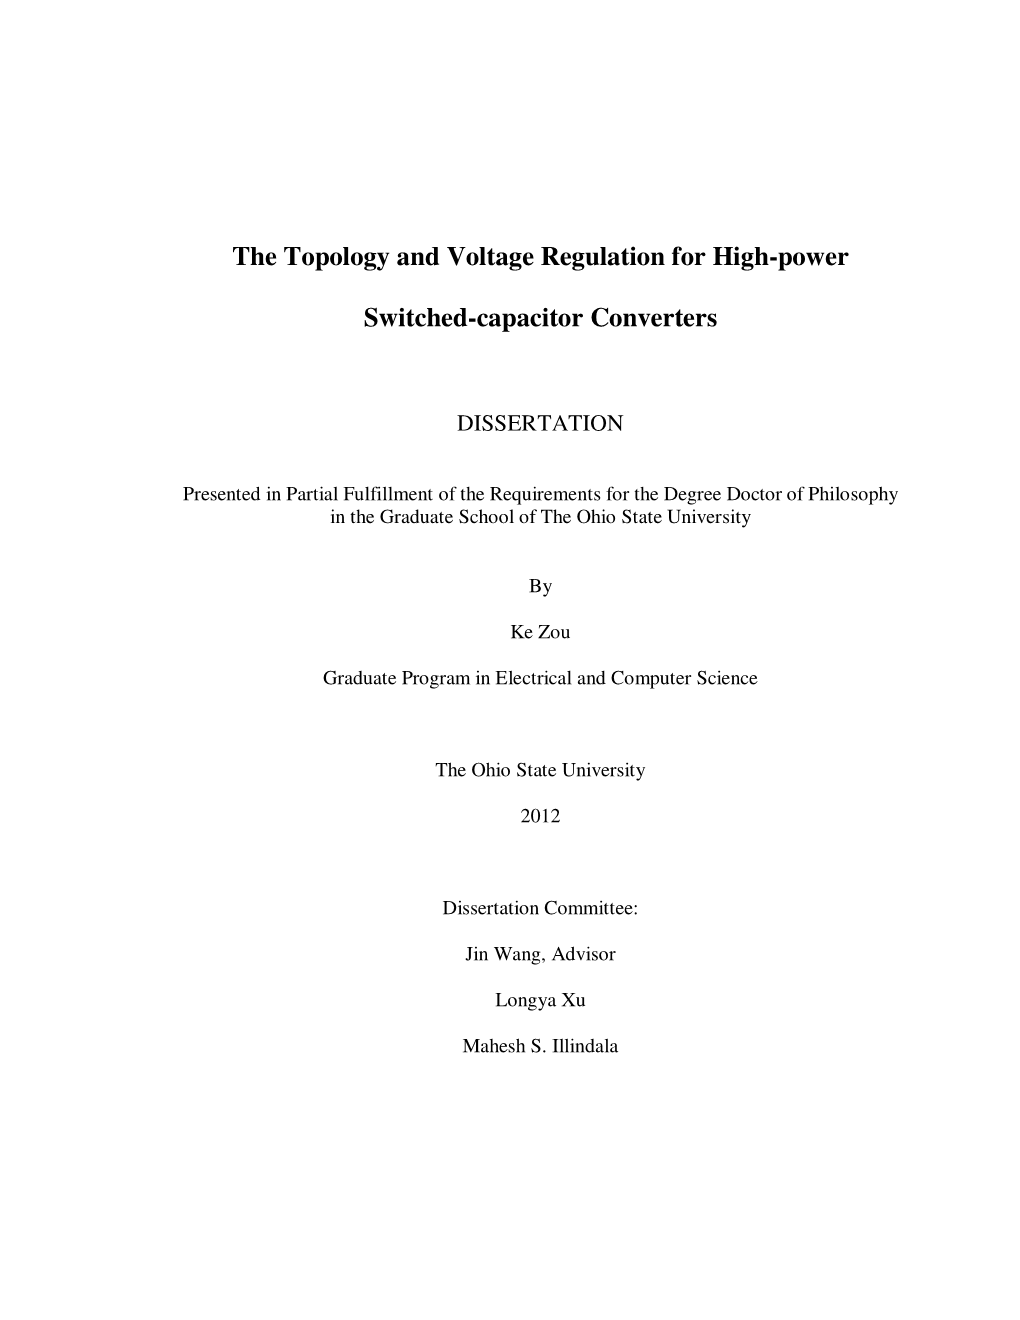 The Topology and Voltage Regulation for High-Power Switched-Capacitor